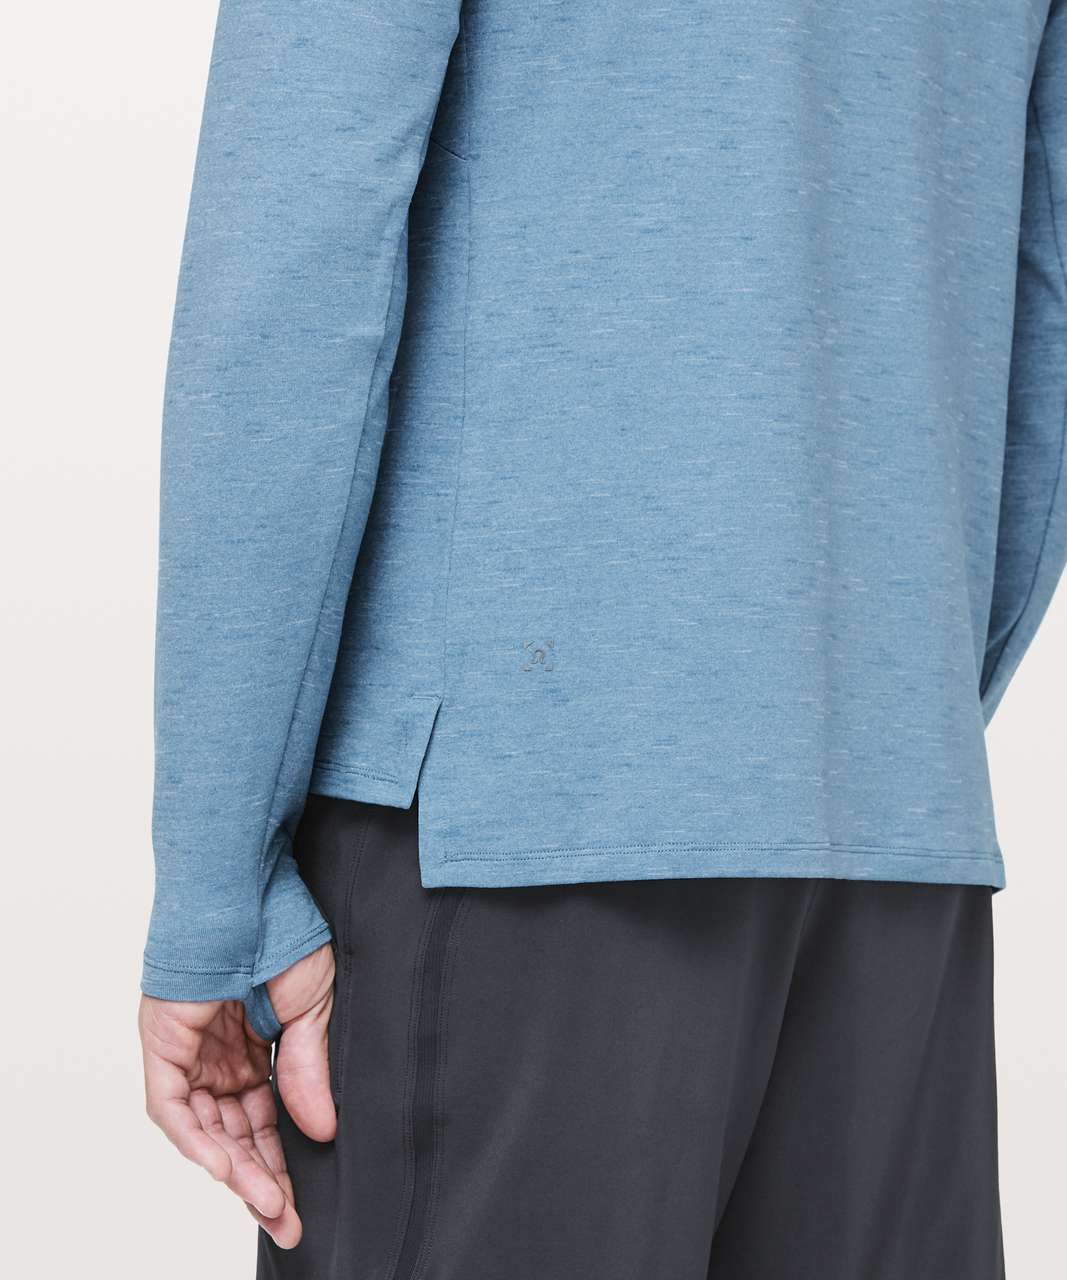 Lululemon Out Of Bounds Hoodie - Heathered Utility Blue